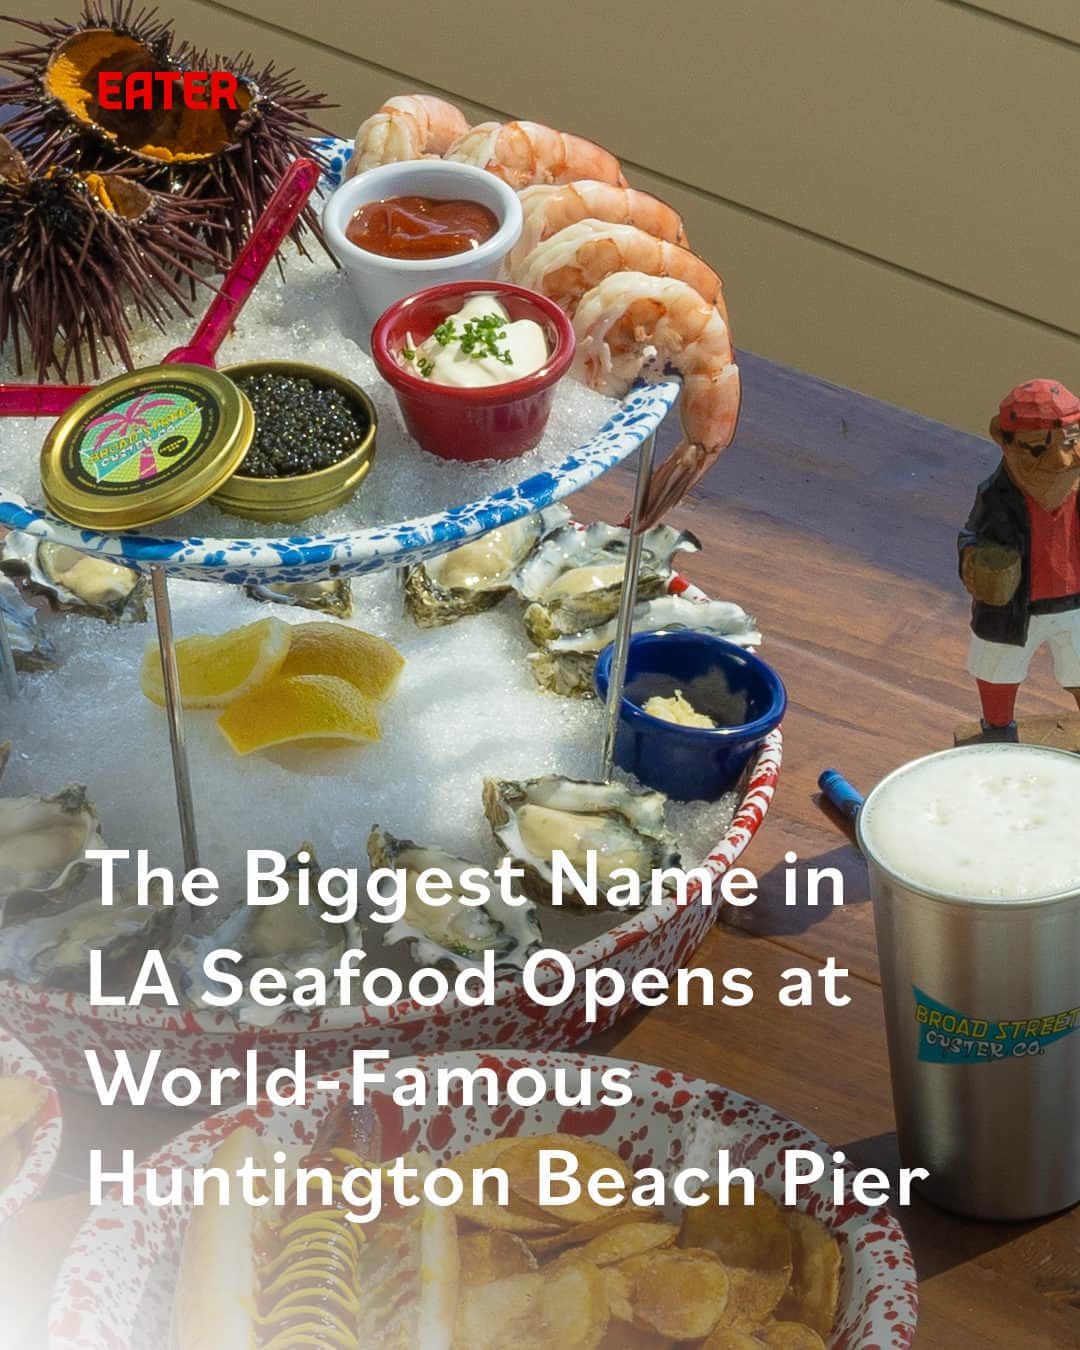 Eater LAのインスタグラム：「Huntington Beach hasn’t seen this kind of restaurant anticipation in years. The eclectic, always vocal Orange County surfside city is getting its own Broad Street Oyster Co. (@broadstreetoysterco) this weekend, and the talk around town has already reached a fever pitch.   This isn’t just any lobster and oyster shack, either; founder Christoper Tompkins has built a colorful seafood behemoth with Broad Street Oyster Co., turning his pop-up into one of Southern California's most sought-after restaurant brands after first opening in 2019. And now Tompkins and company are heading for the famous waves of Huntington Beach.  Read about the new opening by tapping on the link in bio, written by Eater LA senior editor Farley Elliott (@overoverunder).  📸: @meetliamphoto」